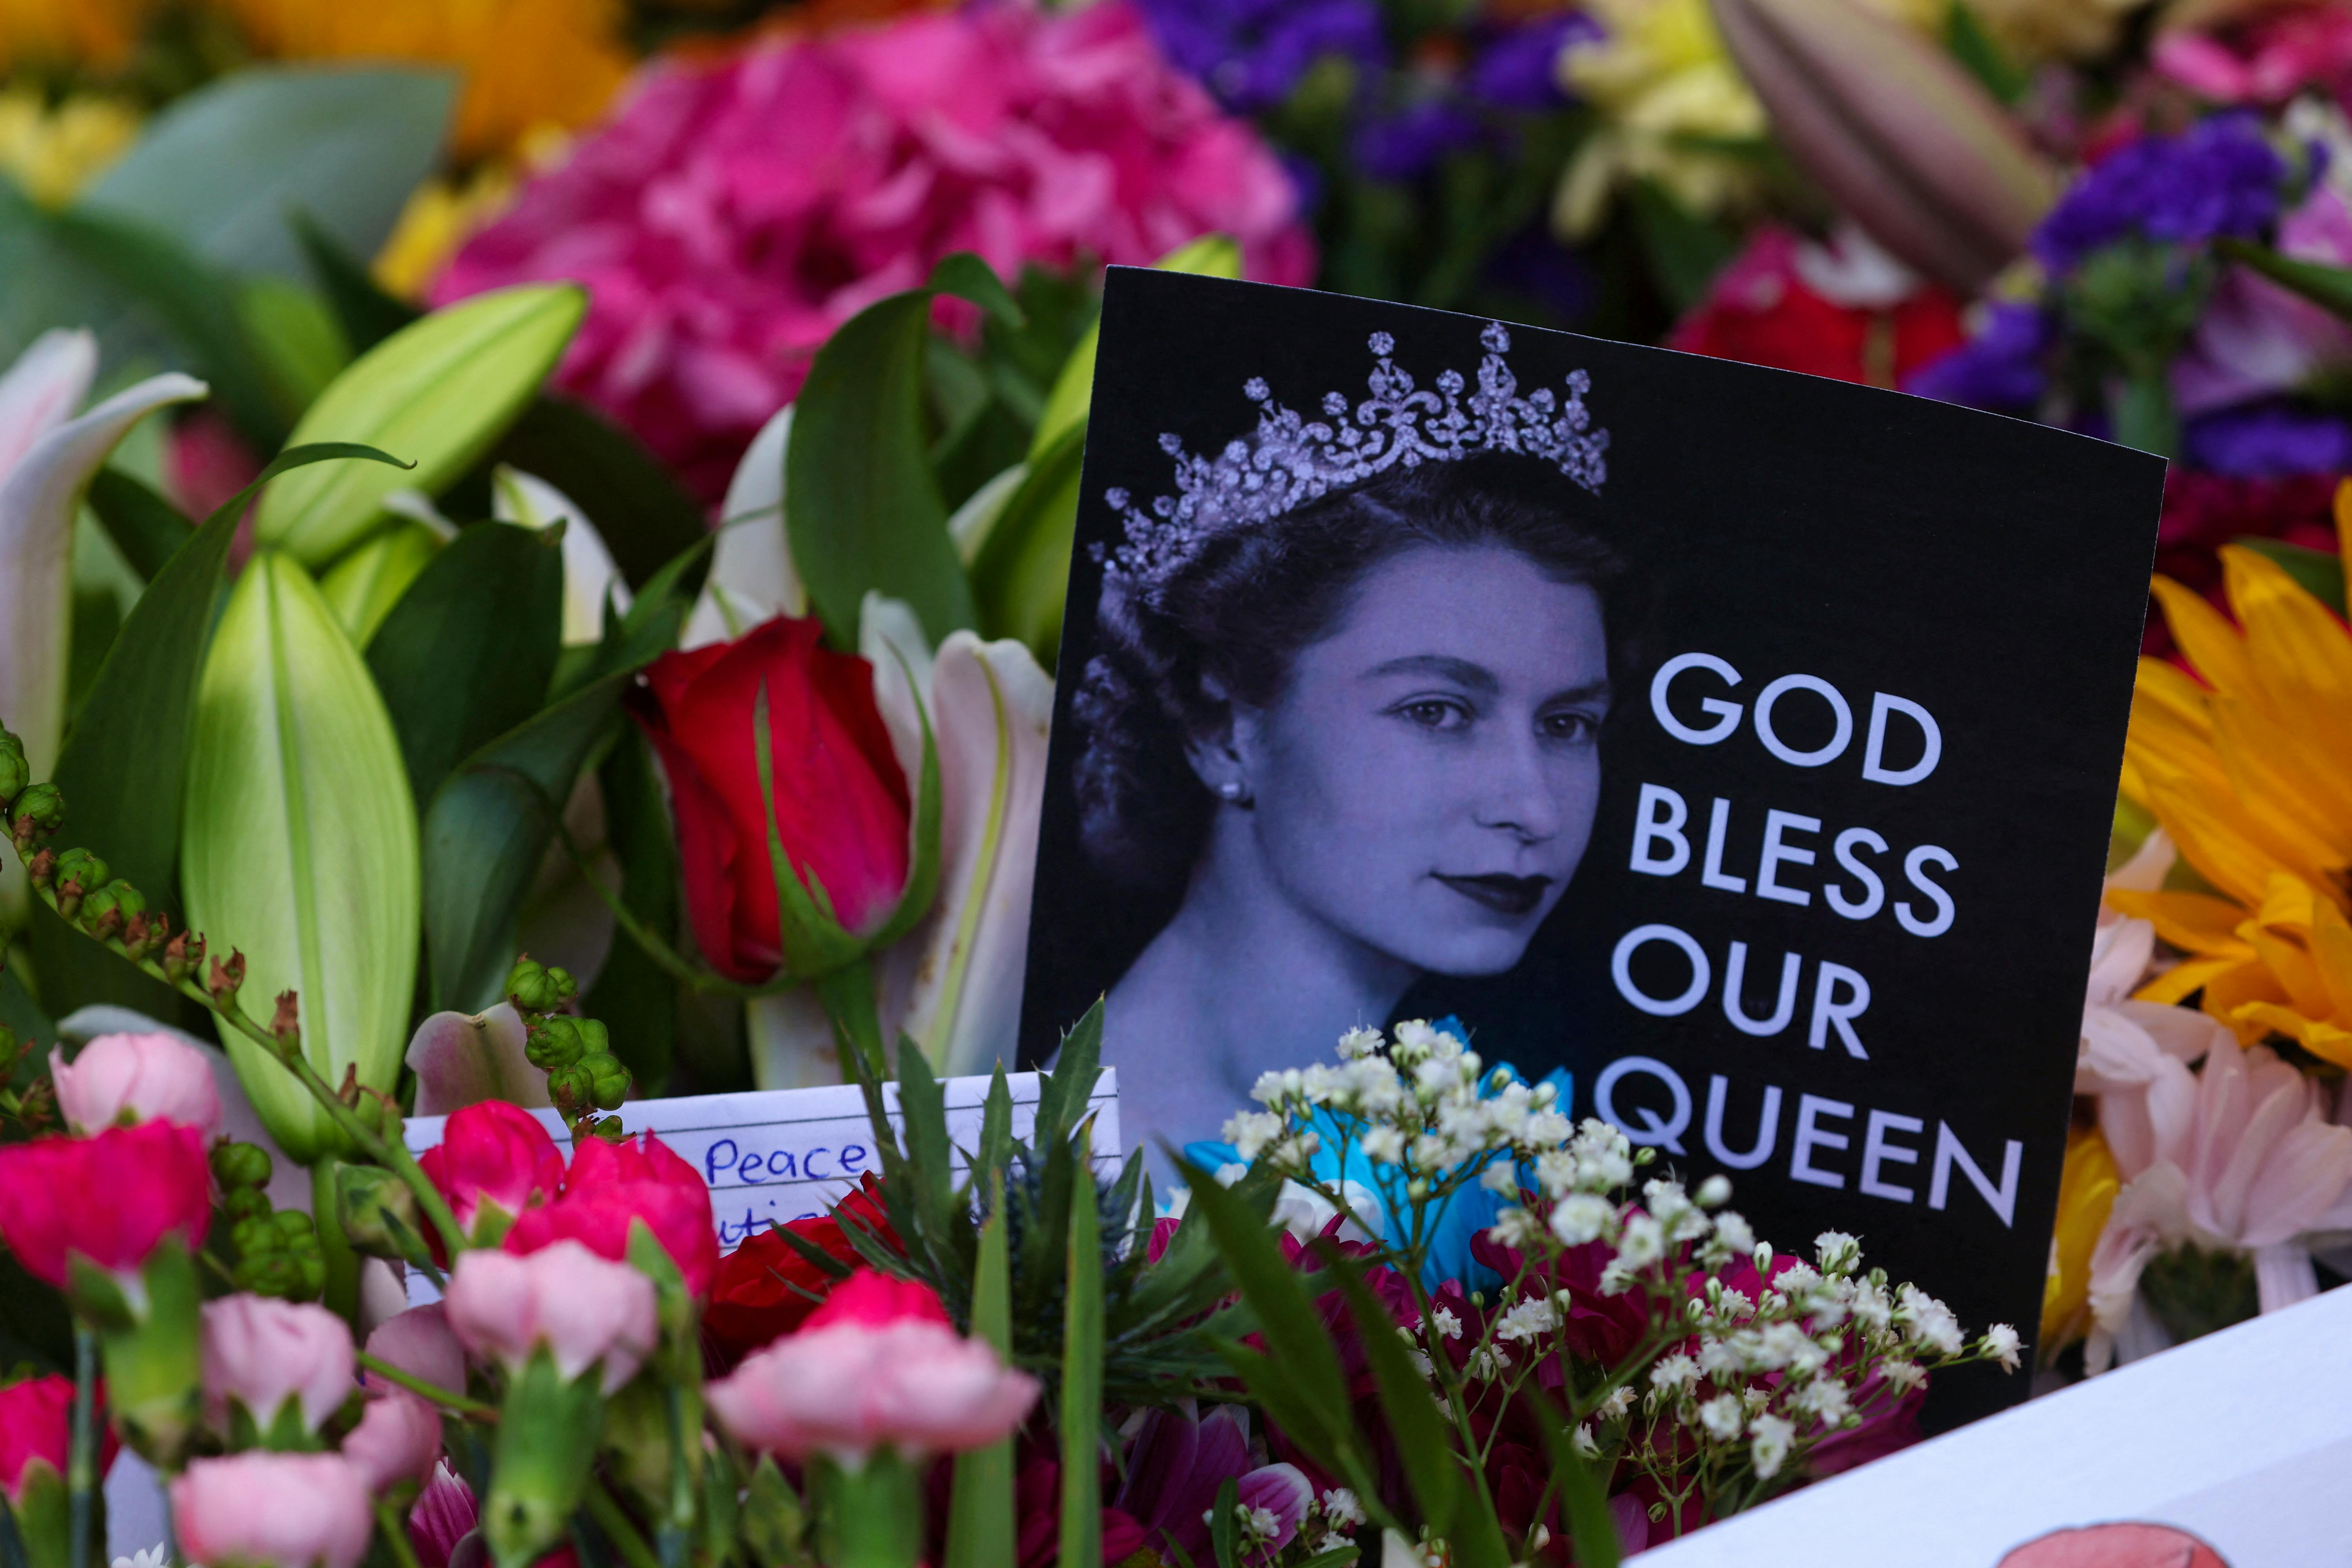 New Brunswickers remember the Queen for her grace and humanity